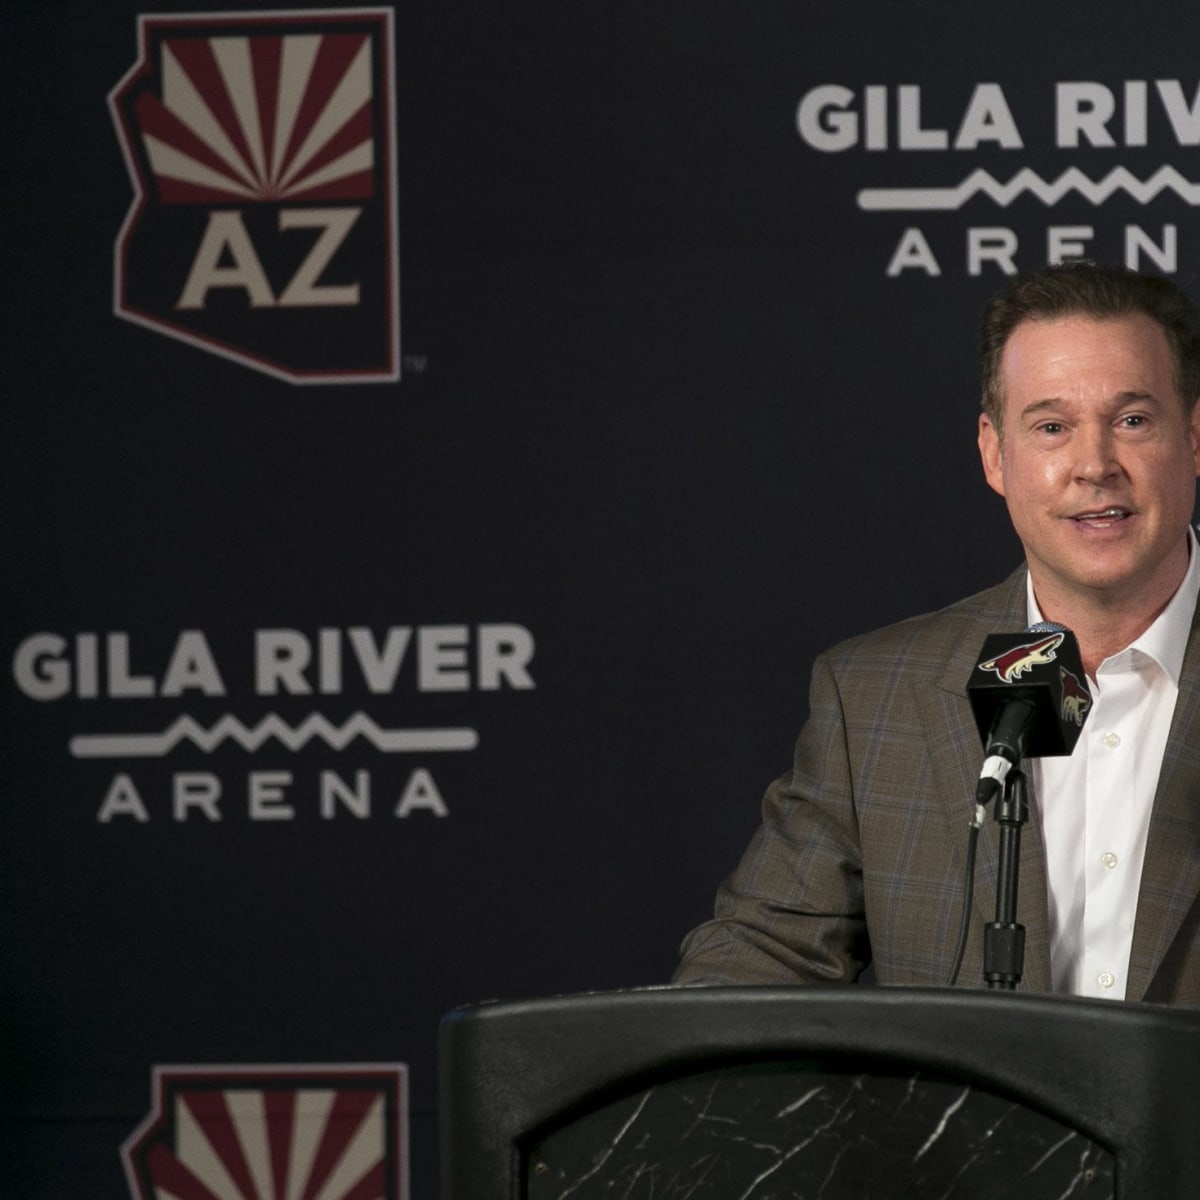 Coyotes' agreement with ASU includes 'good behavior' clause for team, its  owner - The Athletic